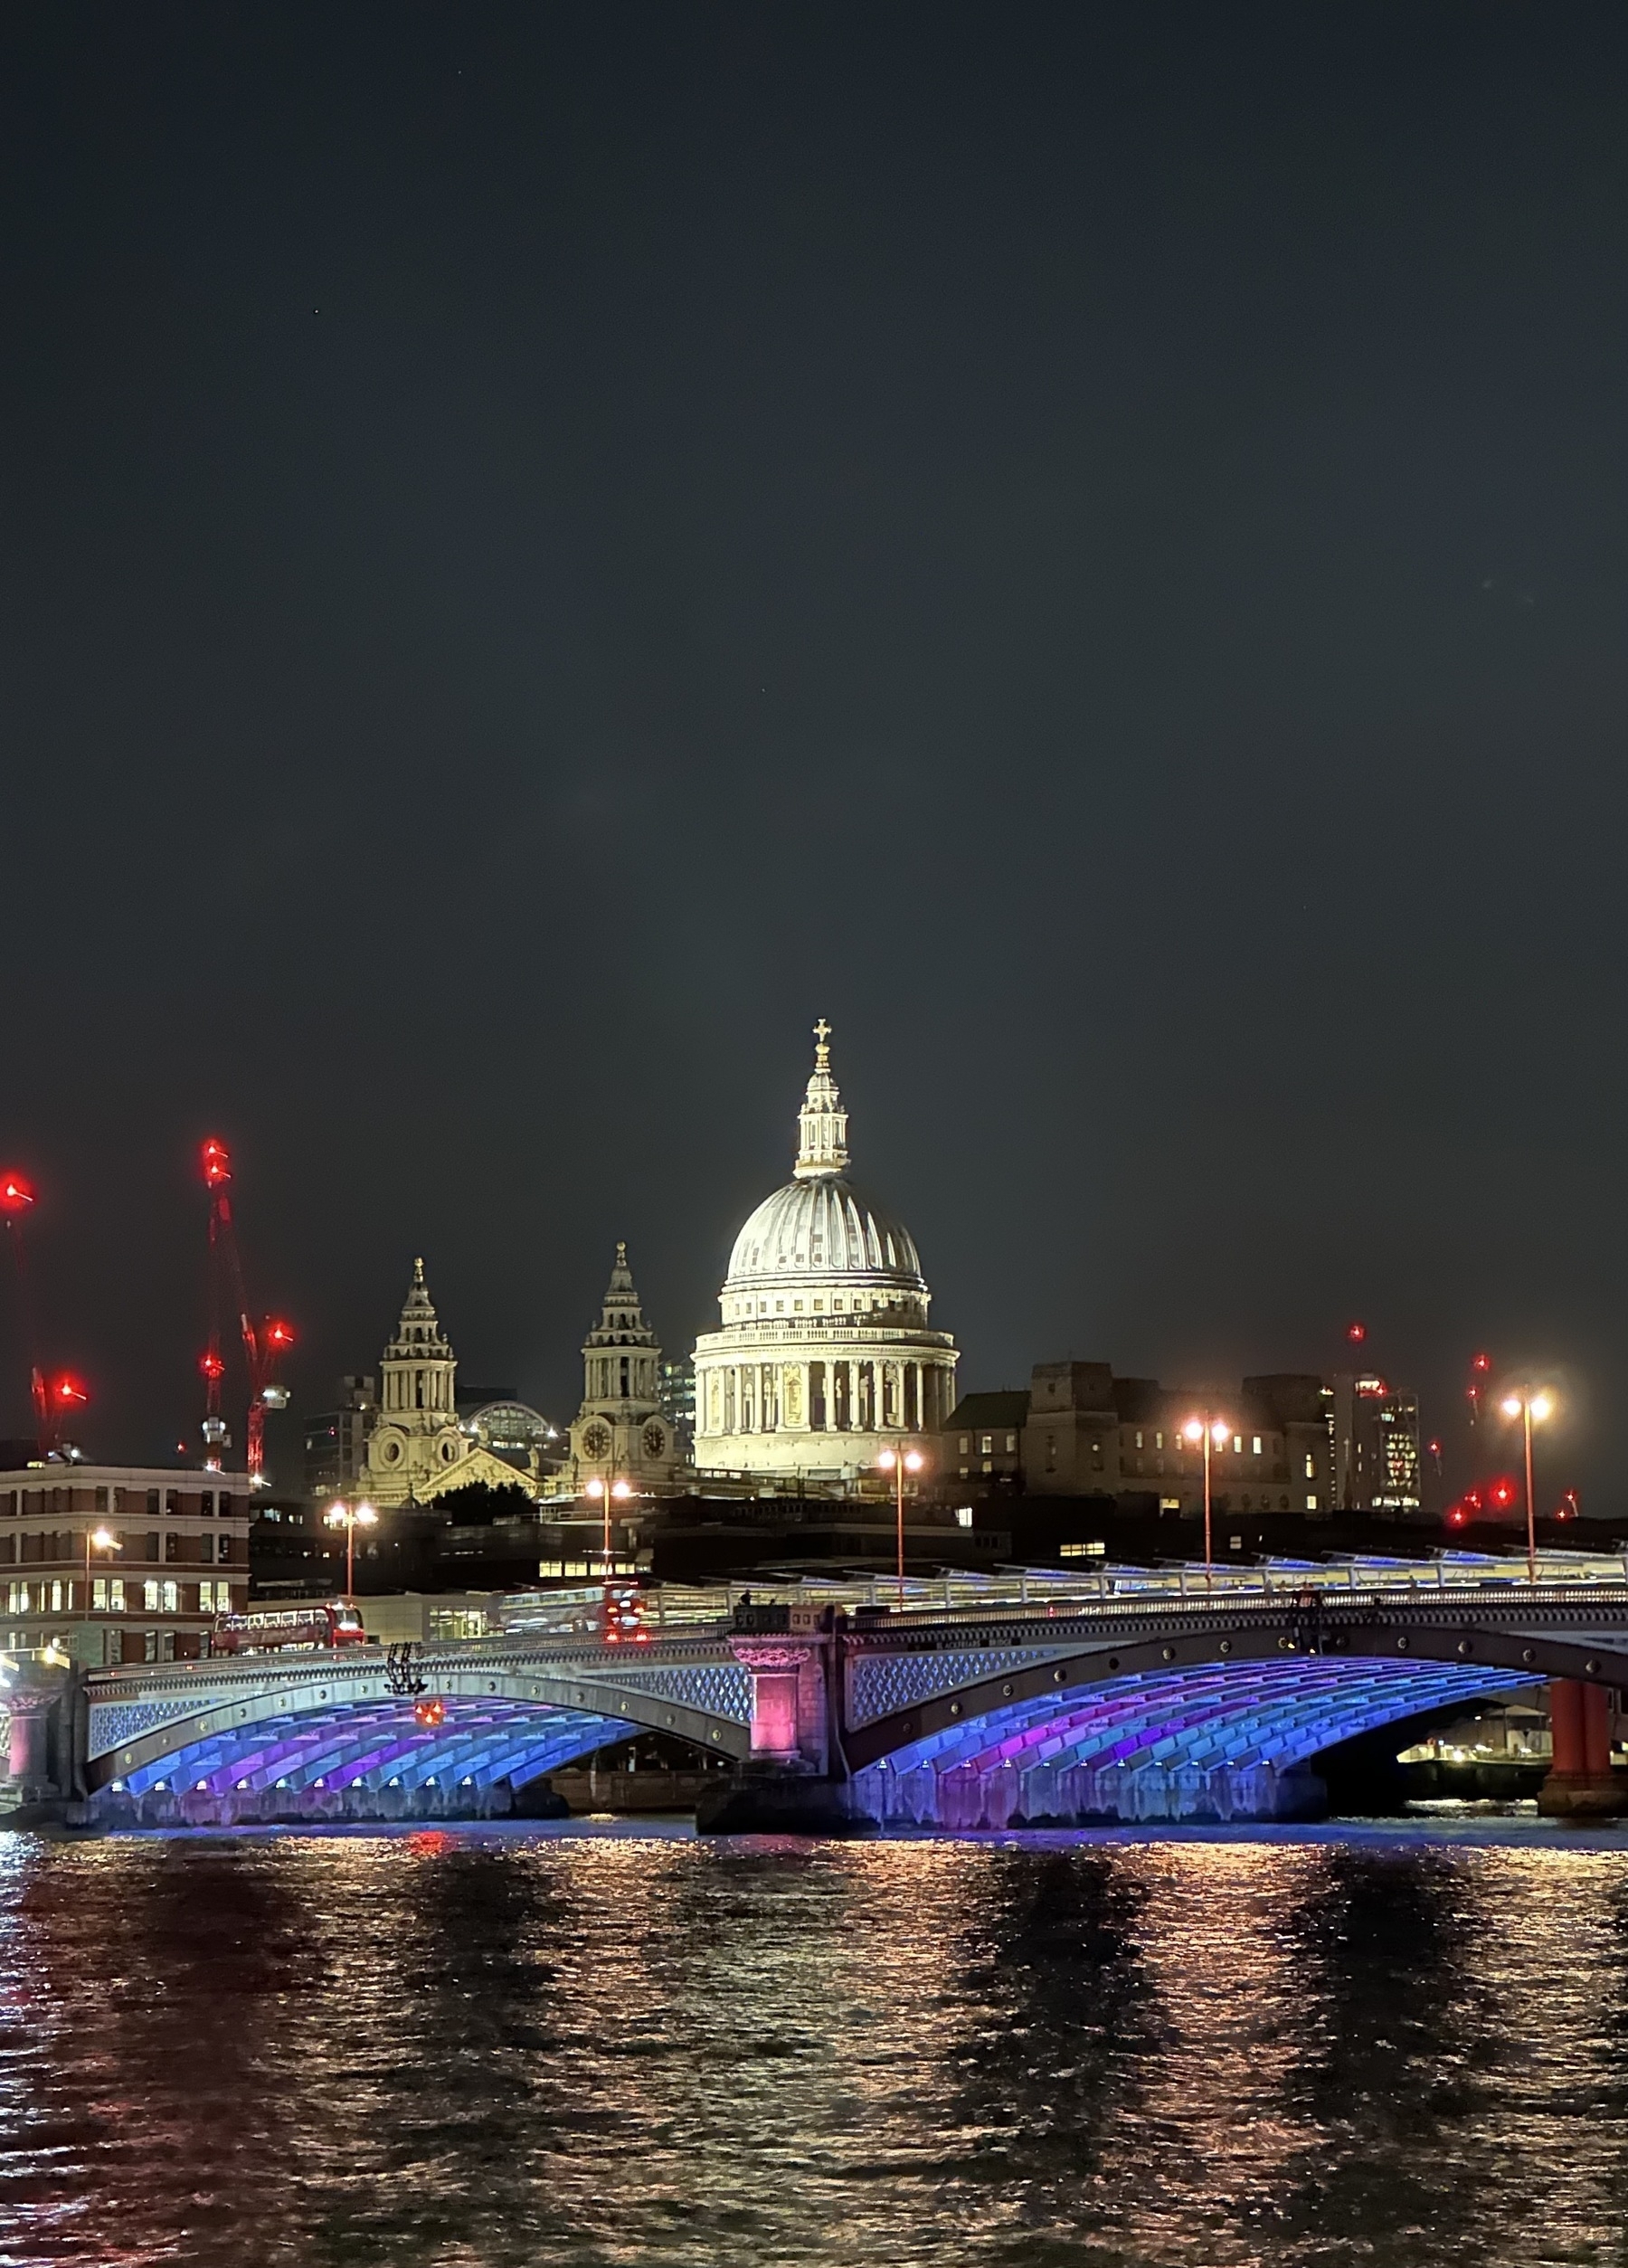 The dome of St Paul’s cathedral lit up at night, seen from across the river Thames, with Blackfriars’s bridge in the foreground.